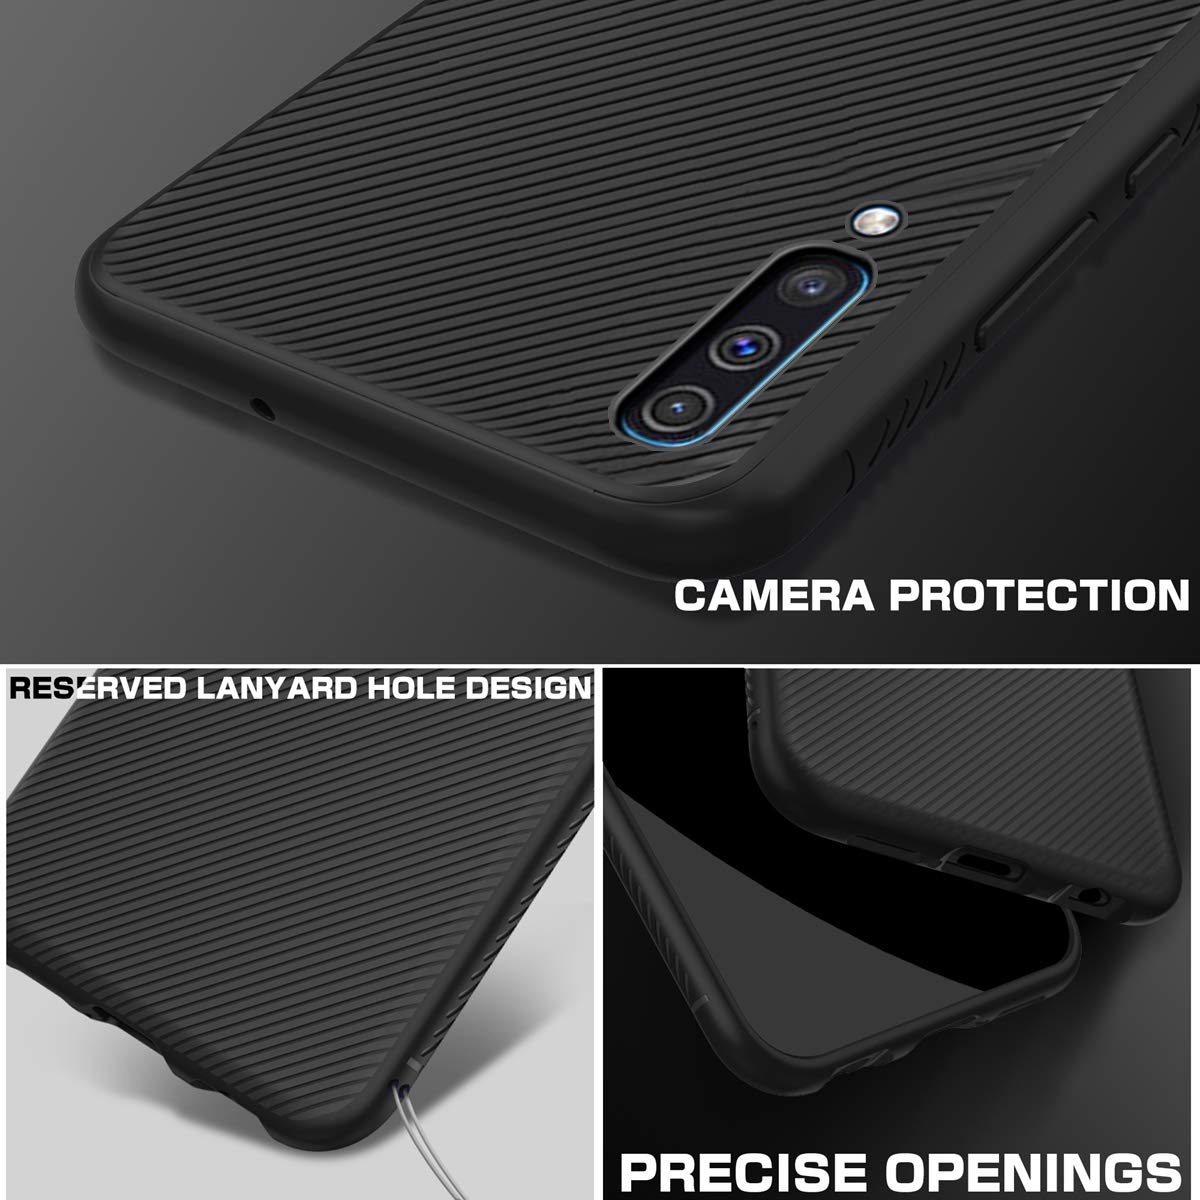 Bakeey-Carbon-Fiber-Protective-Case-For-Samsung-Galaxy-A50-2019-Shockproof-Soft-TPU-Back-Cover-1455285-3